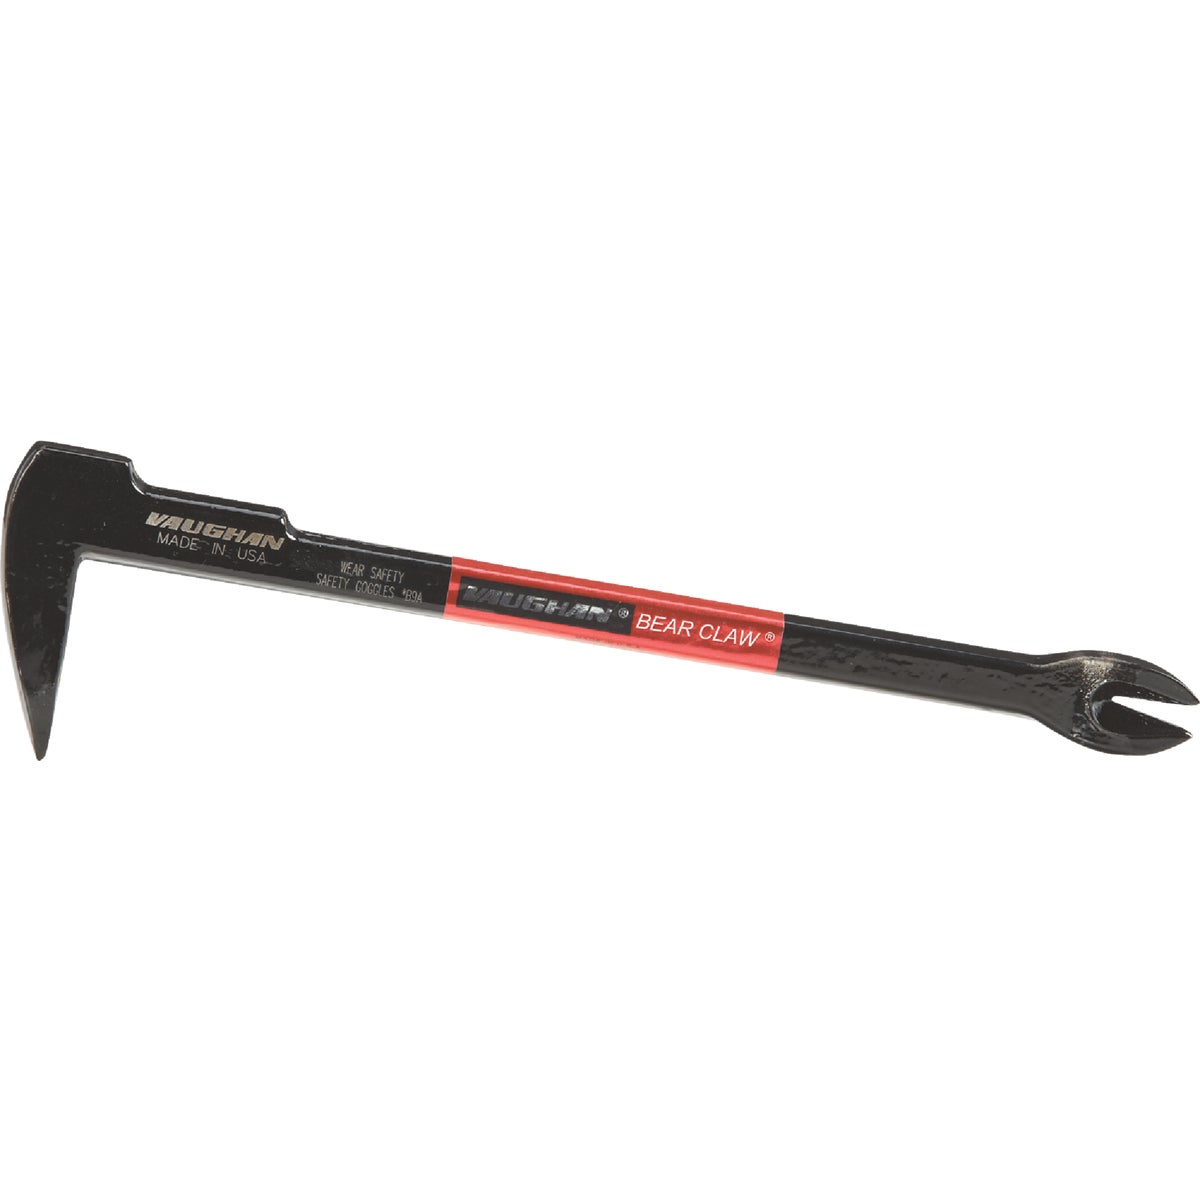 Vaughan Bear Claw 12 In. L Nail Puller